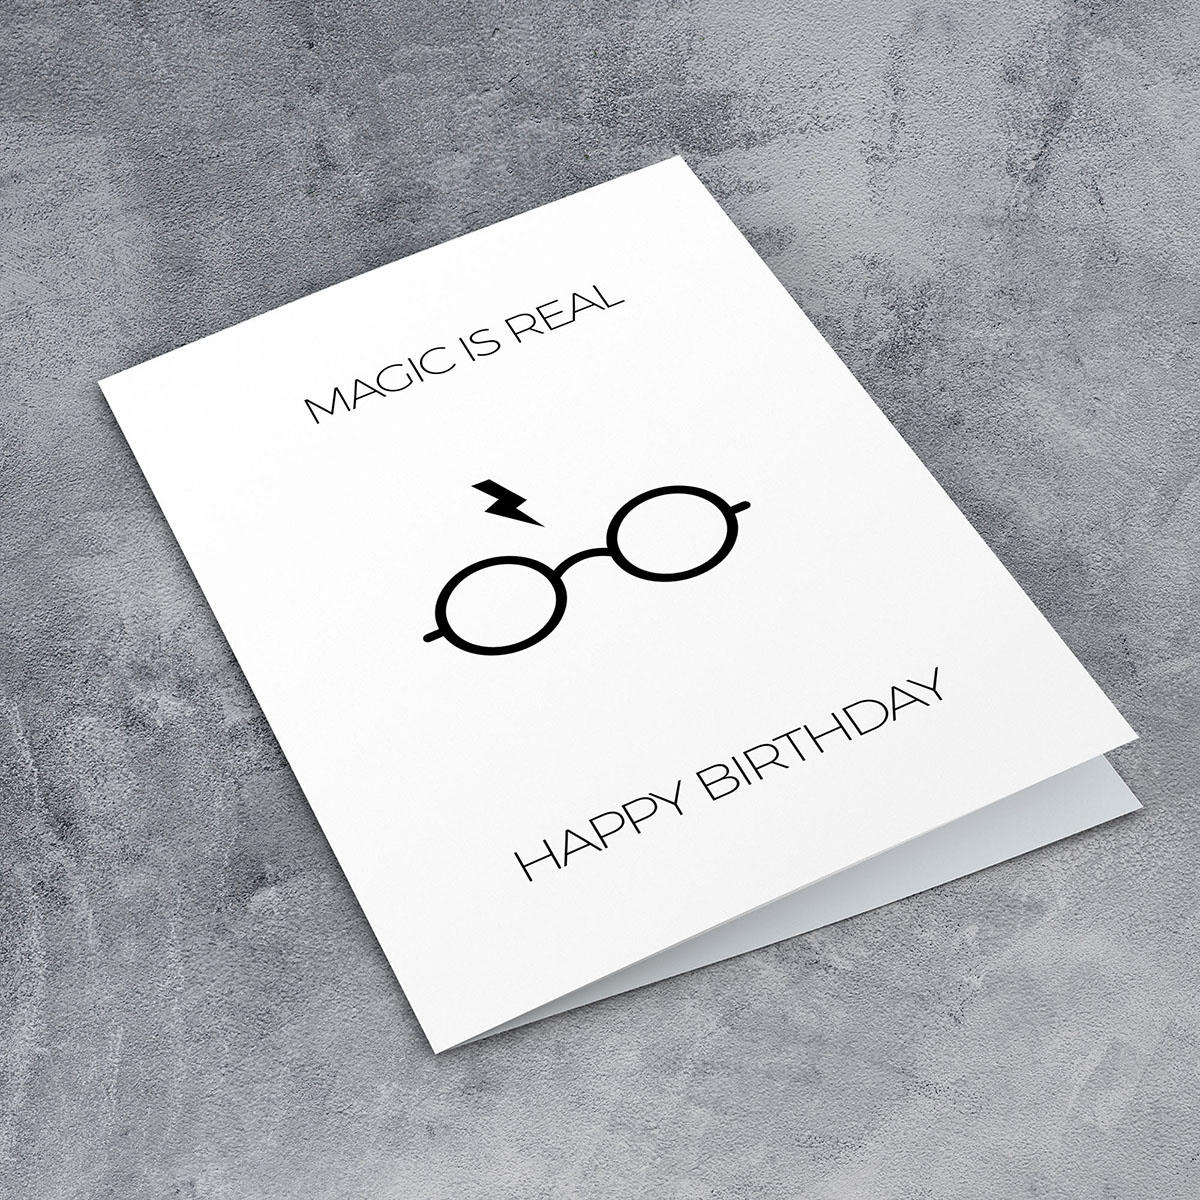 Harry Potter Magic Is Real Card - Pink Tag Prints